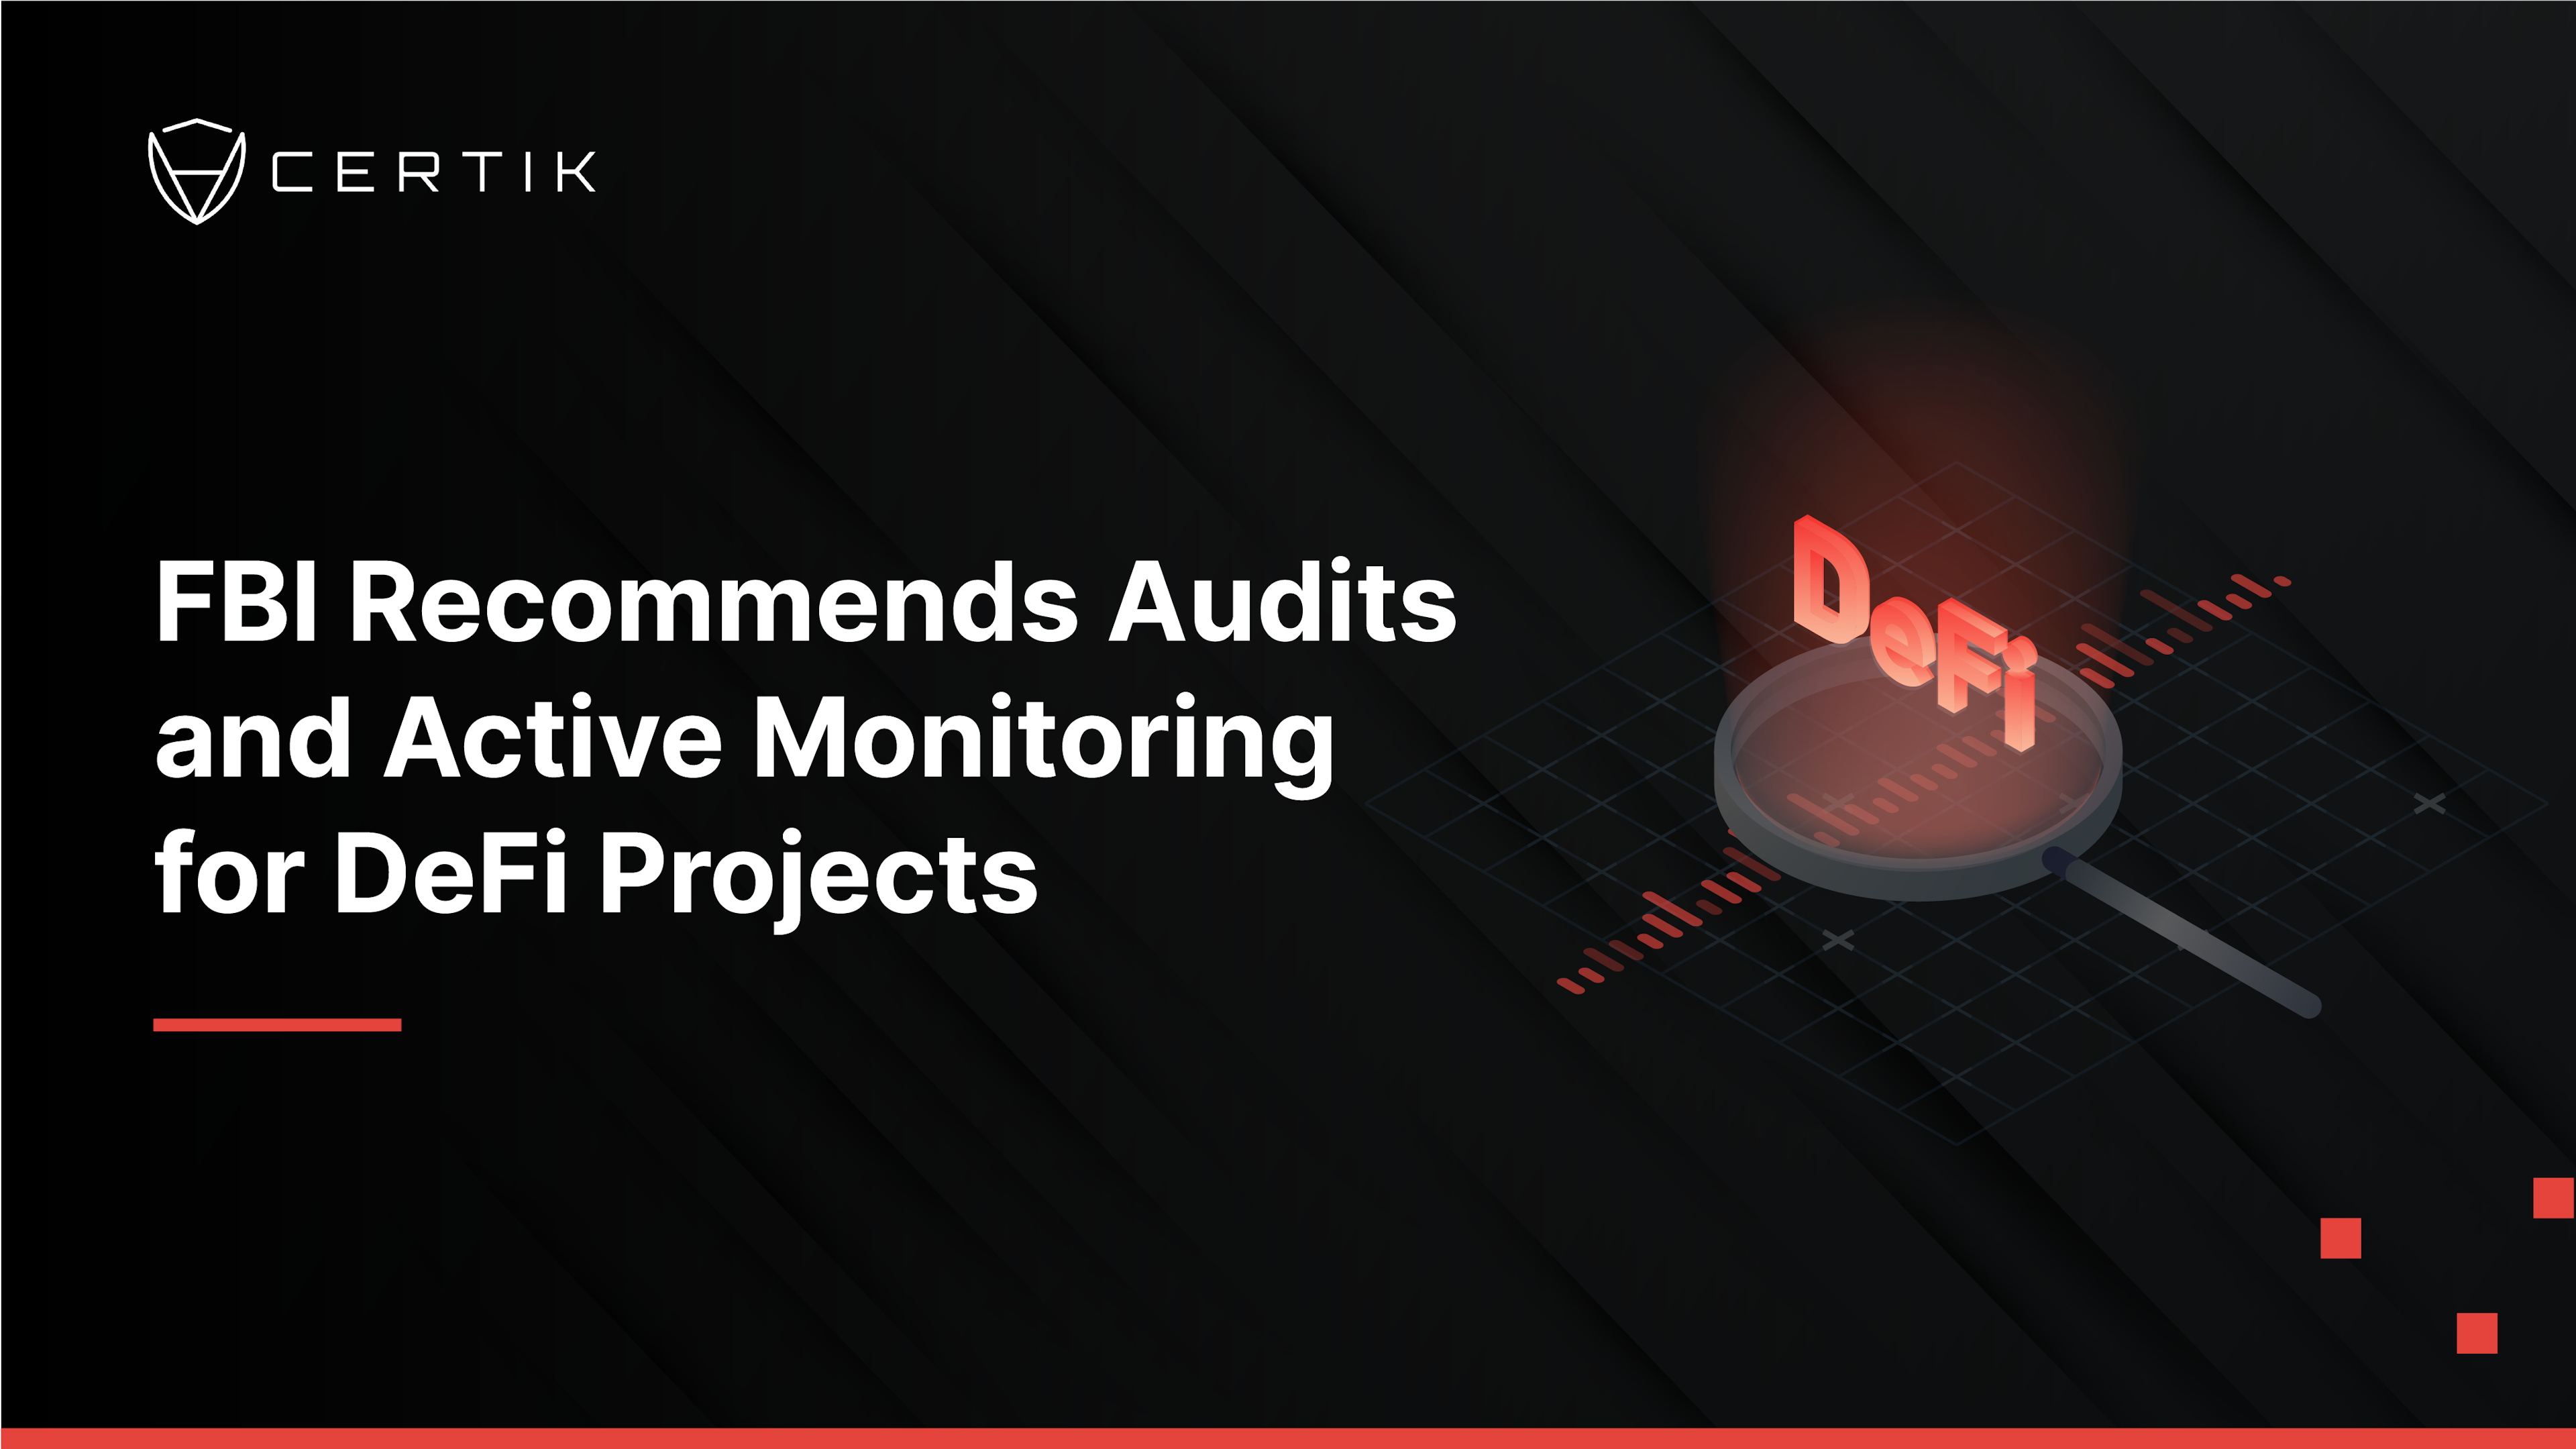 FBI Recommends Audits and Active Monitoring for DeFi Projects